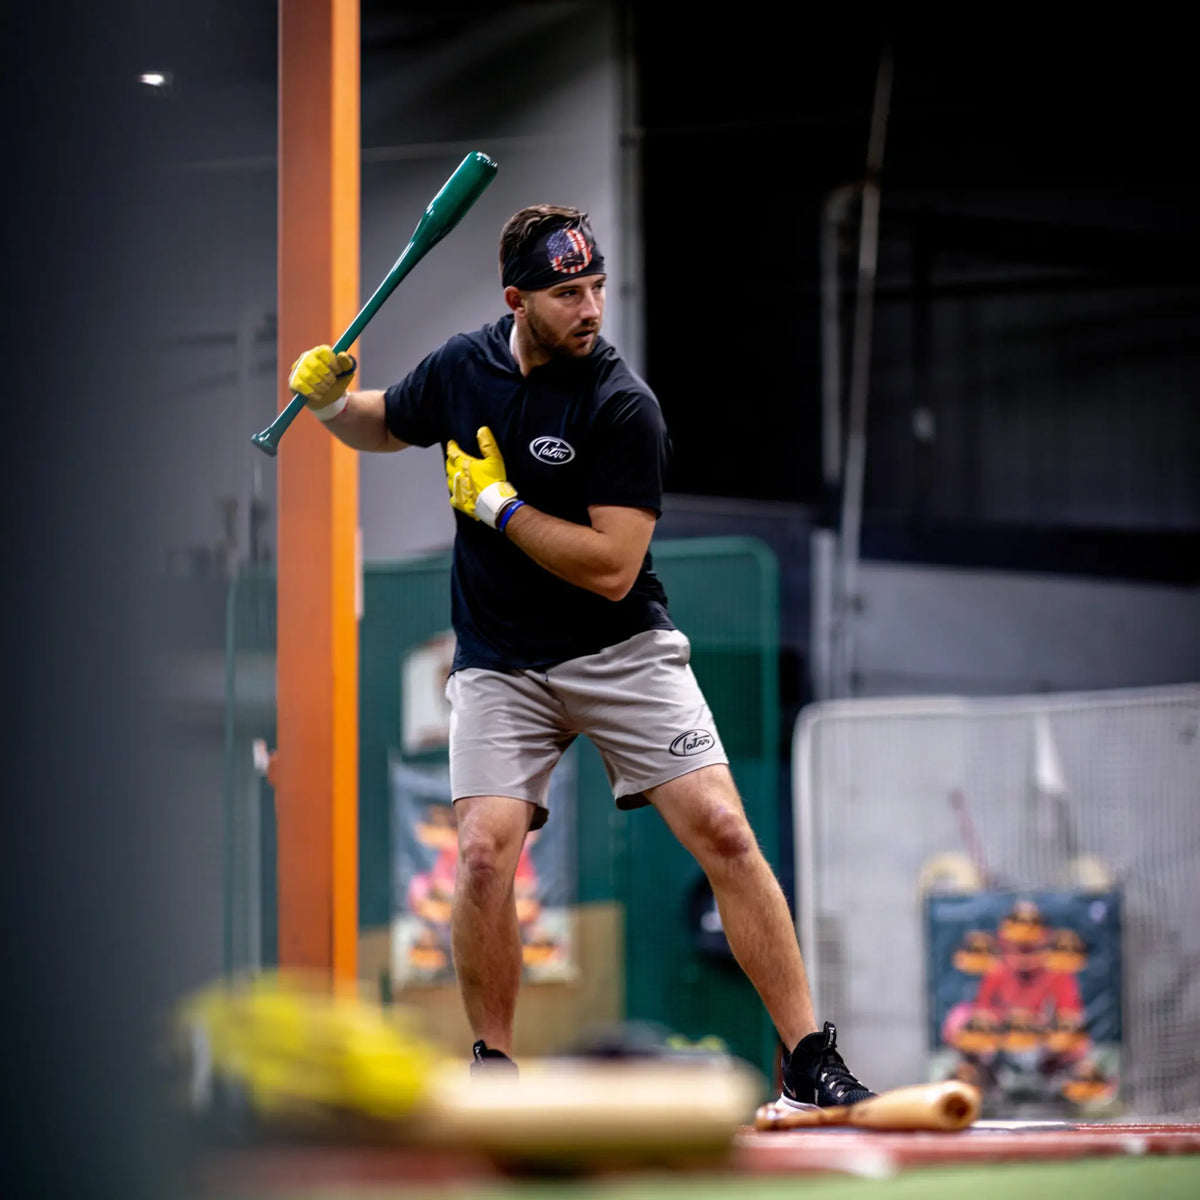 Focused baseball player engaged in one-hand batting drills with a Tater Baseball short training bat, wearing a Tater headband and batting gloves, exemplifying dedicated practice in an indoor facility.